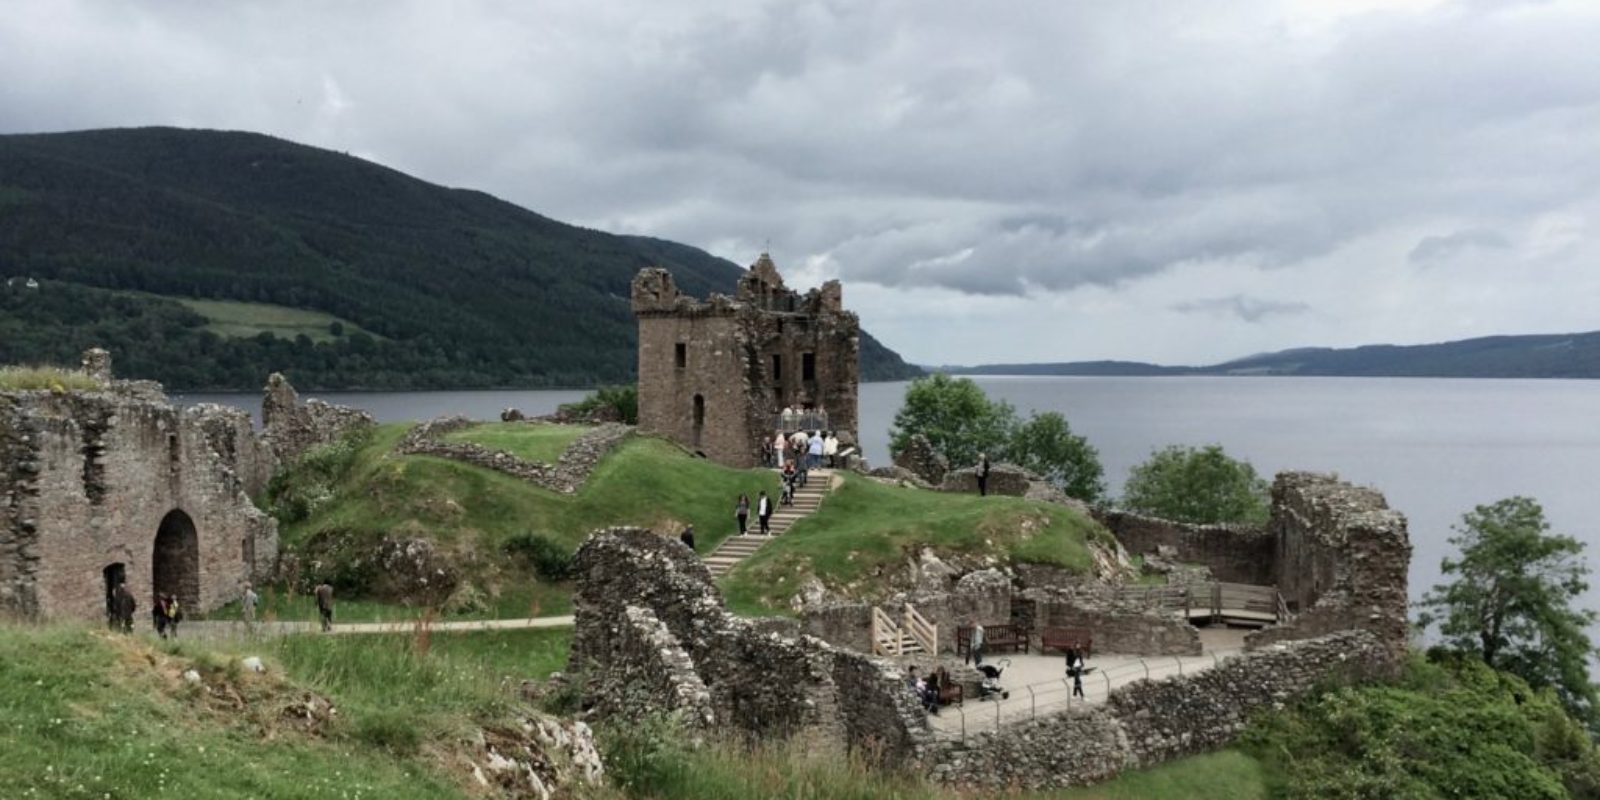 Inverness is a popular, quaint city in the Scottish Highlands. Its most famous resident is Nessie, but there are plenty of other reasons to visit...